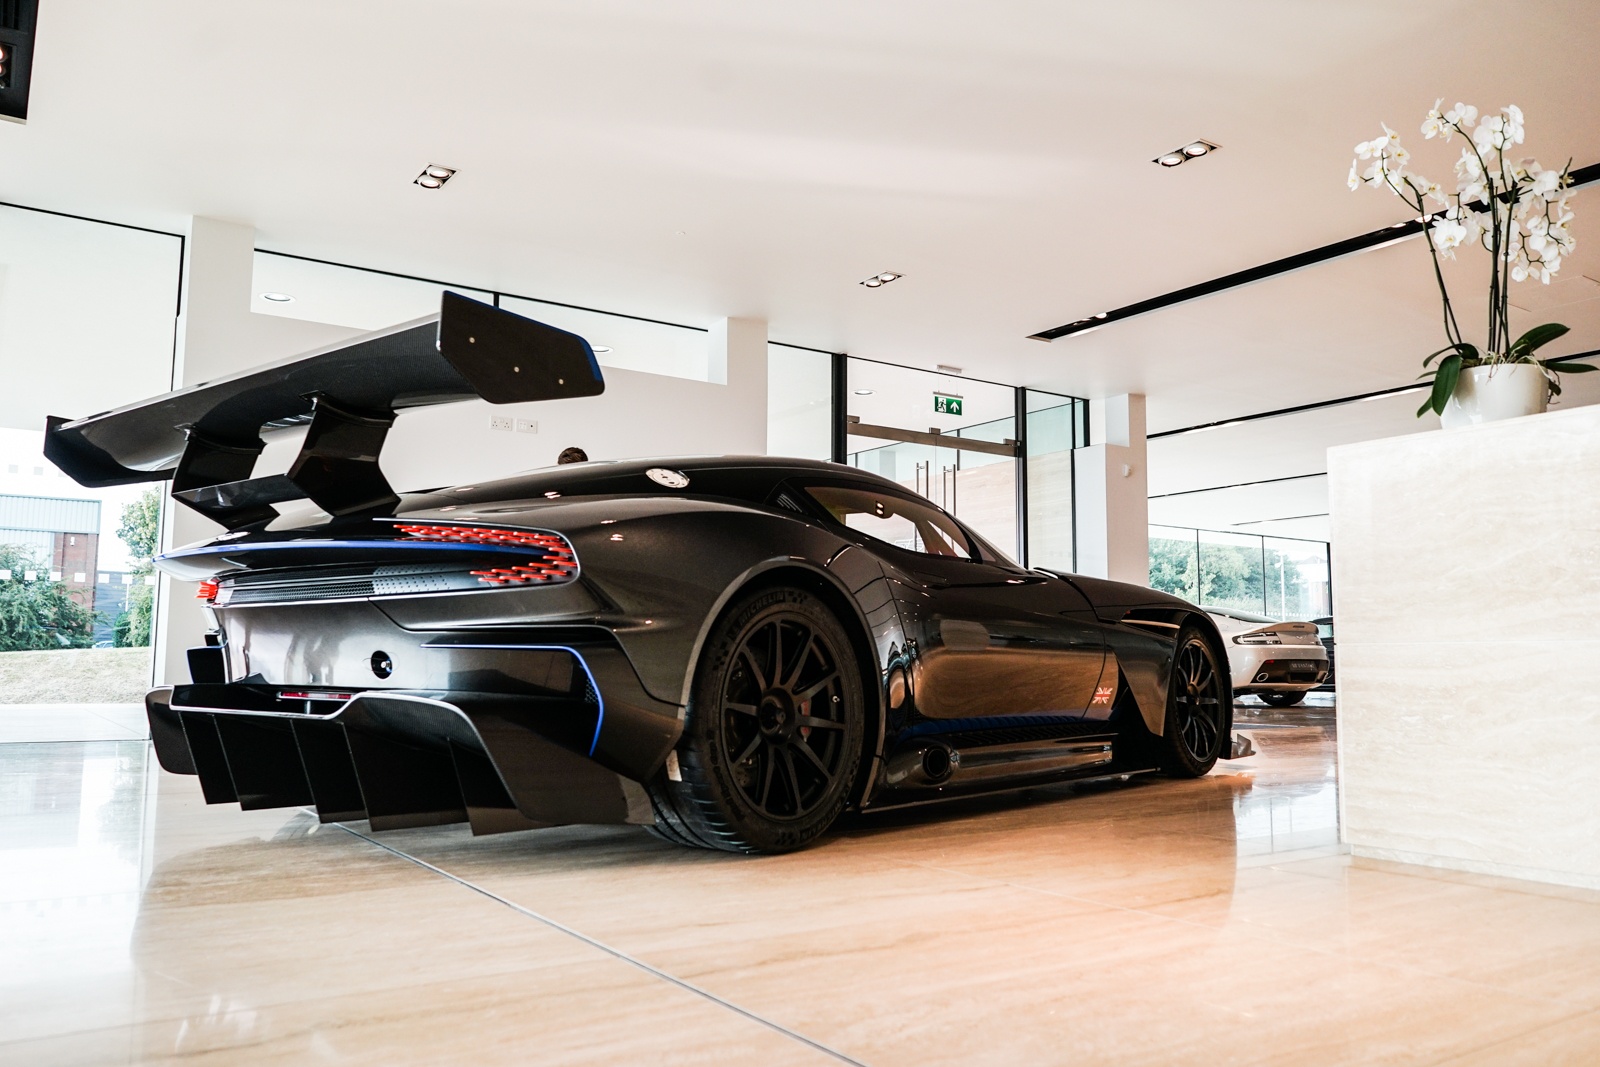 This Aston Martin Vulcan Is For Sale For R43 Million